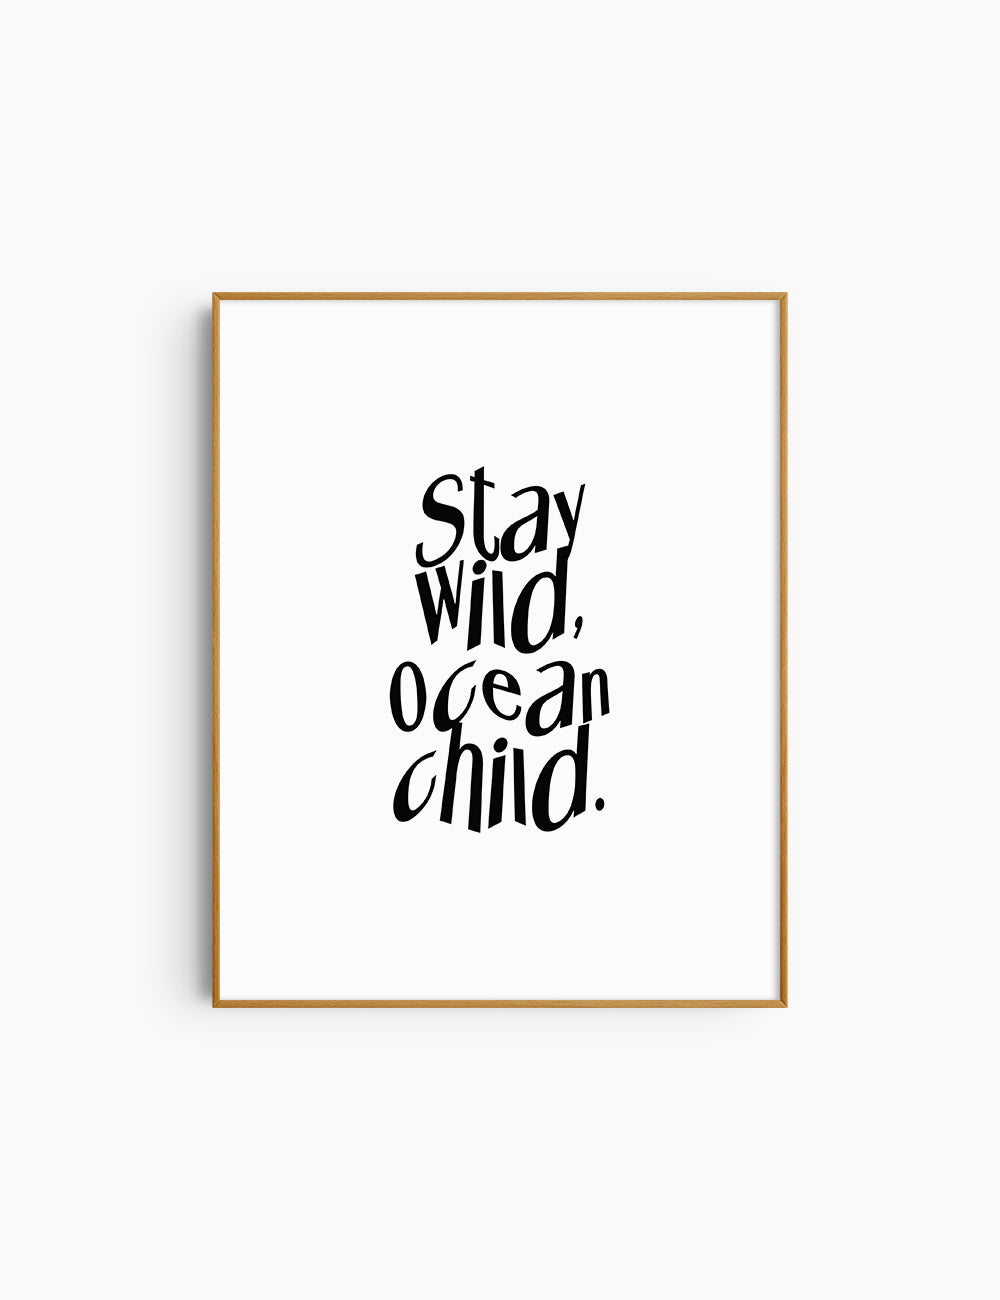 STAY WILD, OCEAN CHILD. Black and White. Printable Wall Art Quote